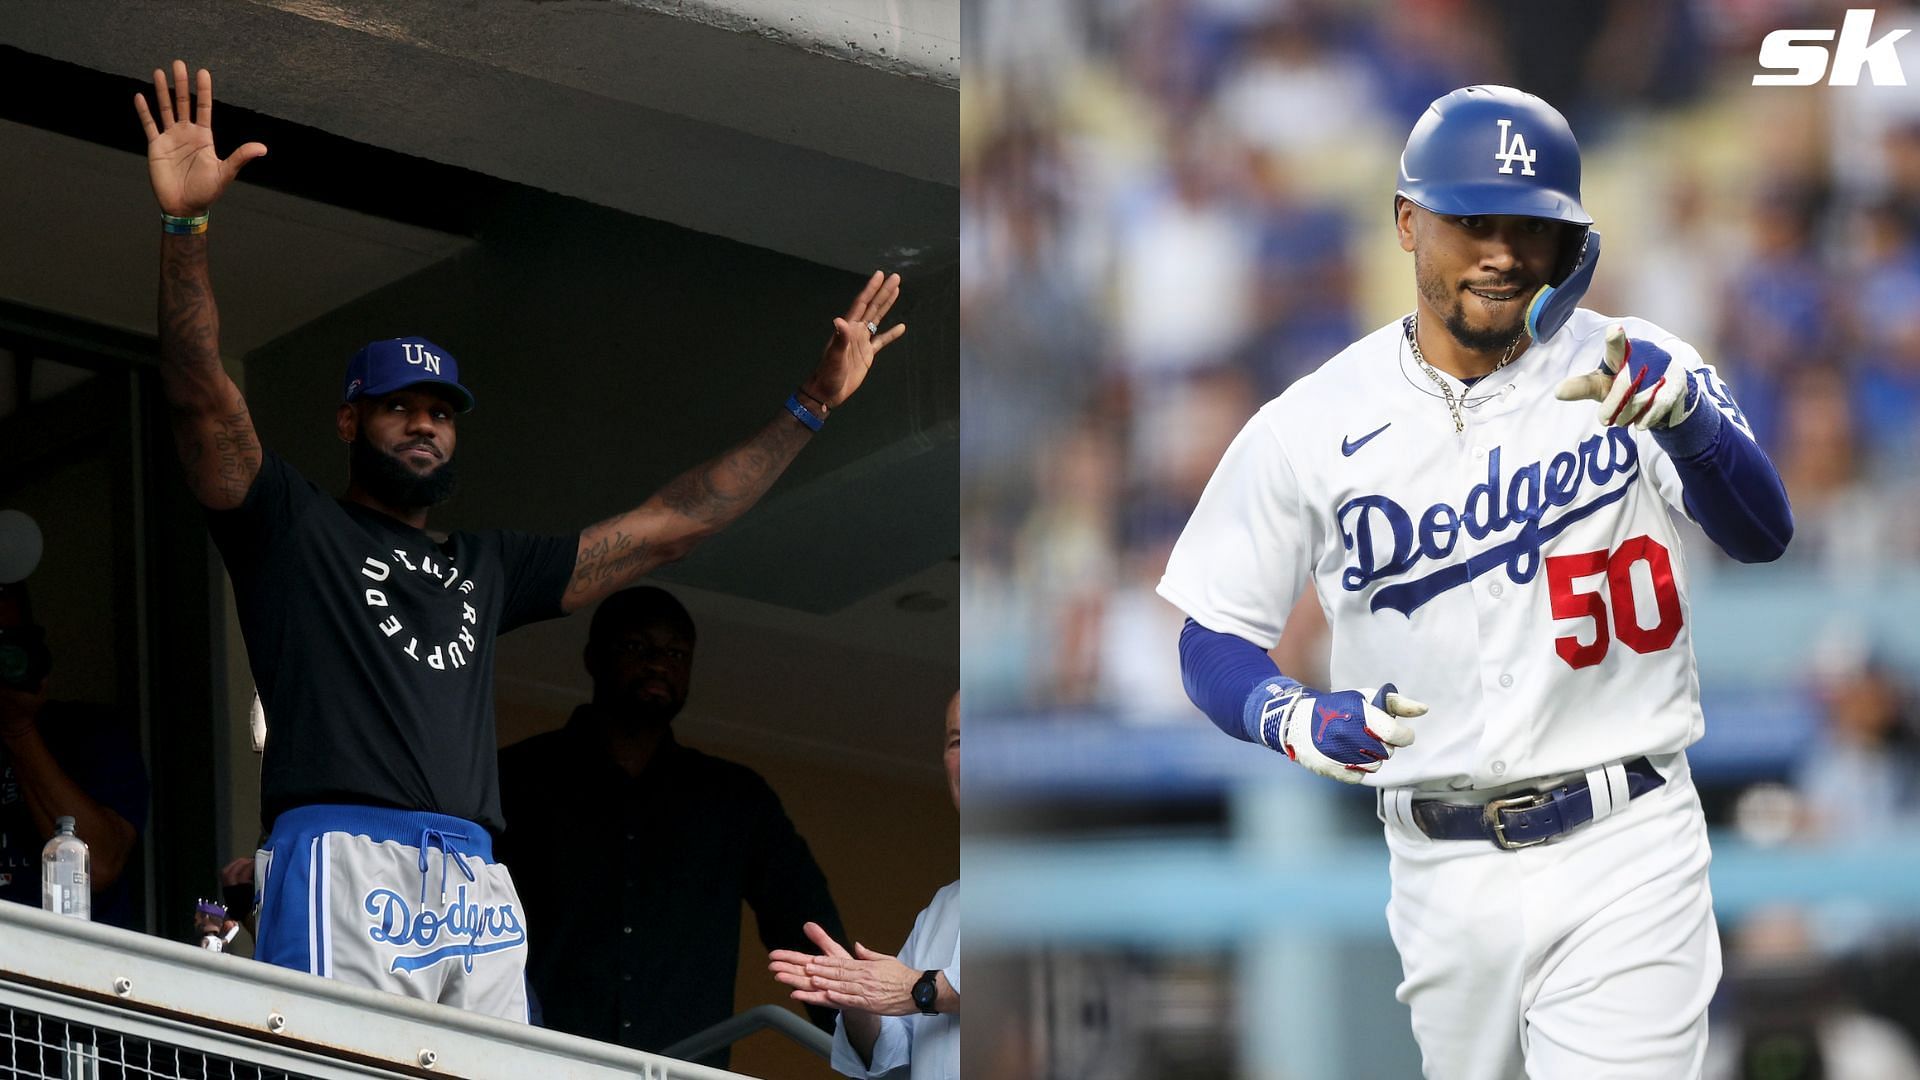 LeBron James of the LA Lakers and Mookie Betts of the LA Dodgers